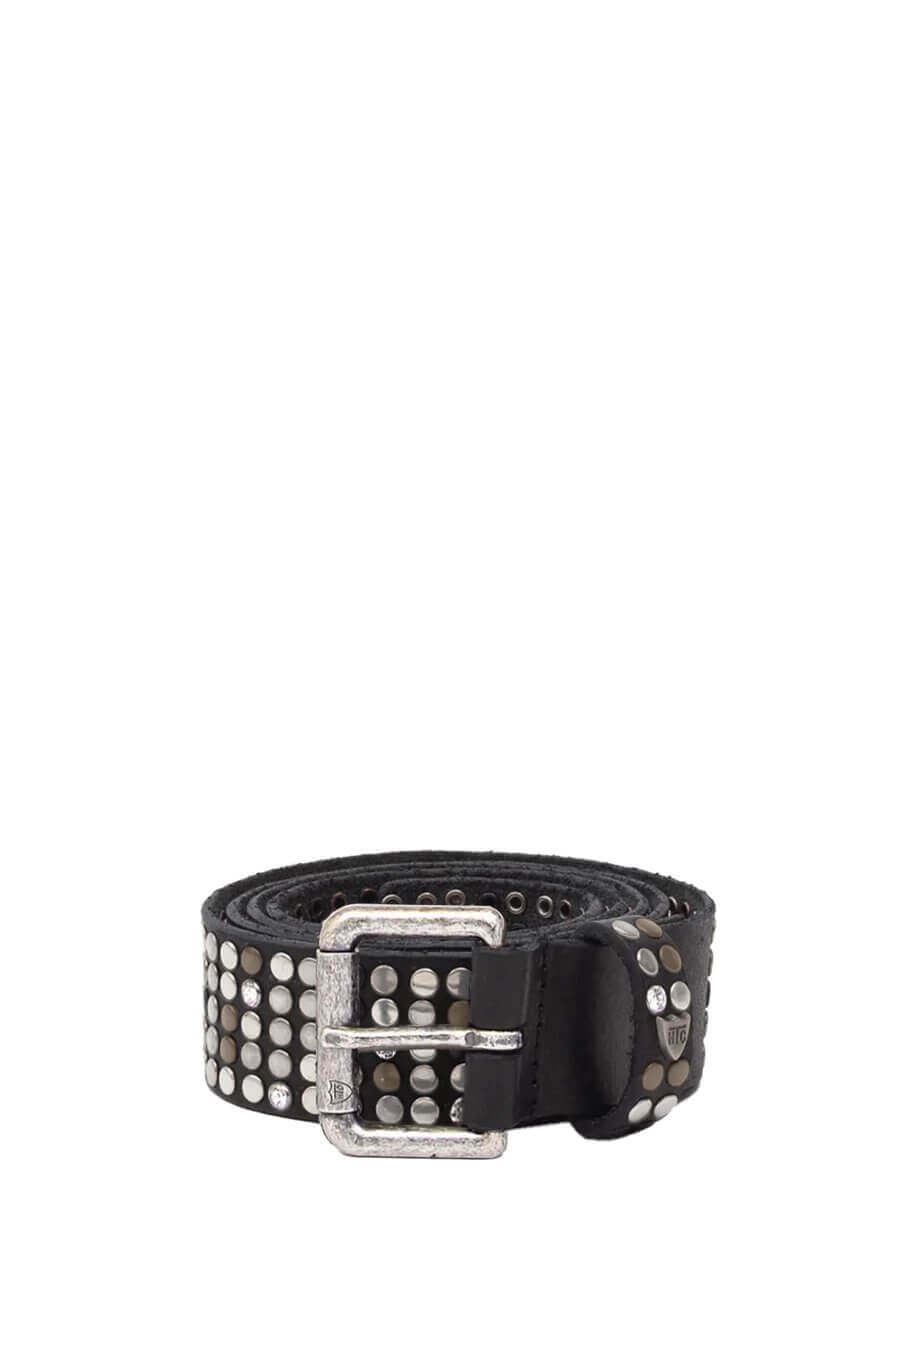 5.000 STUDS DELUXE BELT Black leather belt with mixed studs and rhinestones, brass buckle, studded zamac belt loop with HTC logo rivet. Height: 3.5 cm. Made in Italy. HTC LOS ANGELES